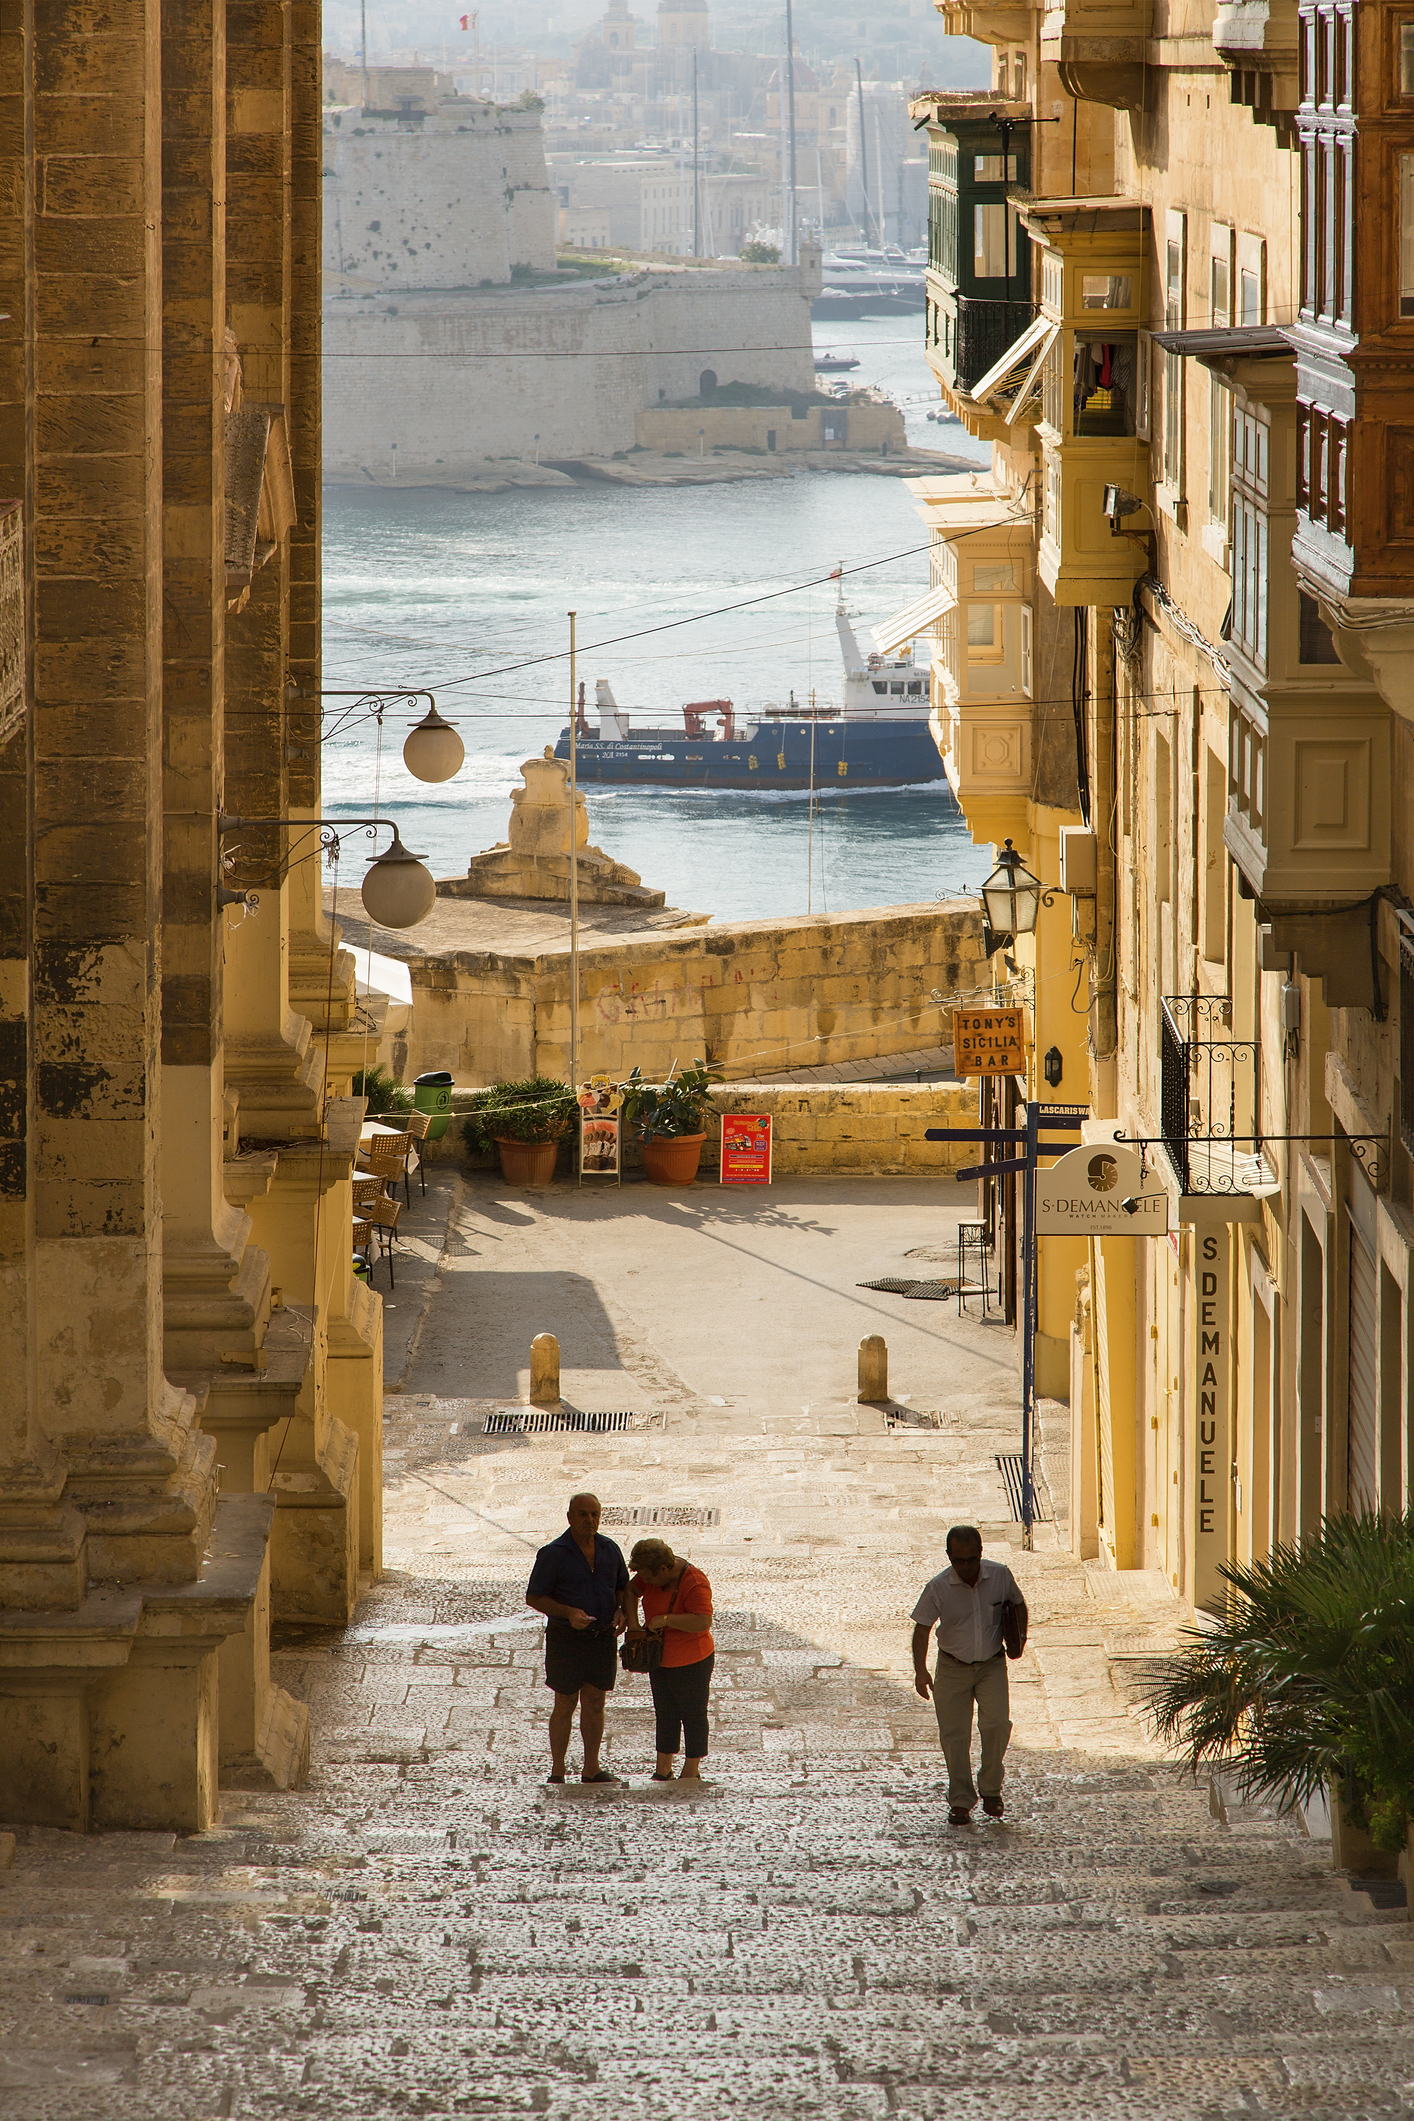 A view down a historic street with three pedestrians and a distant harbor